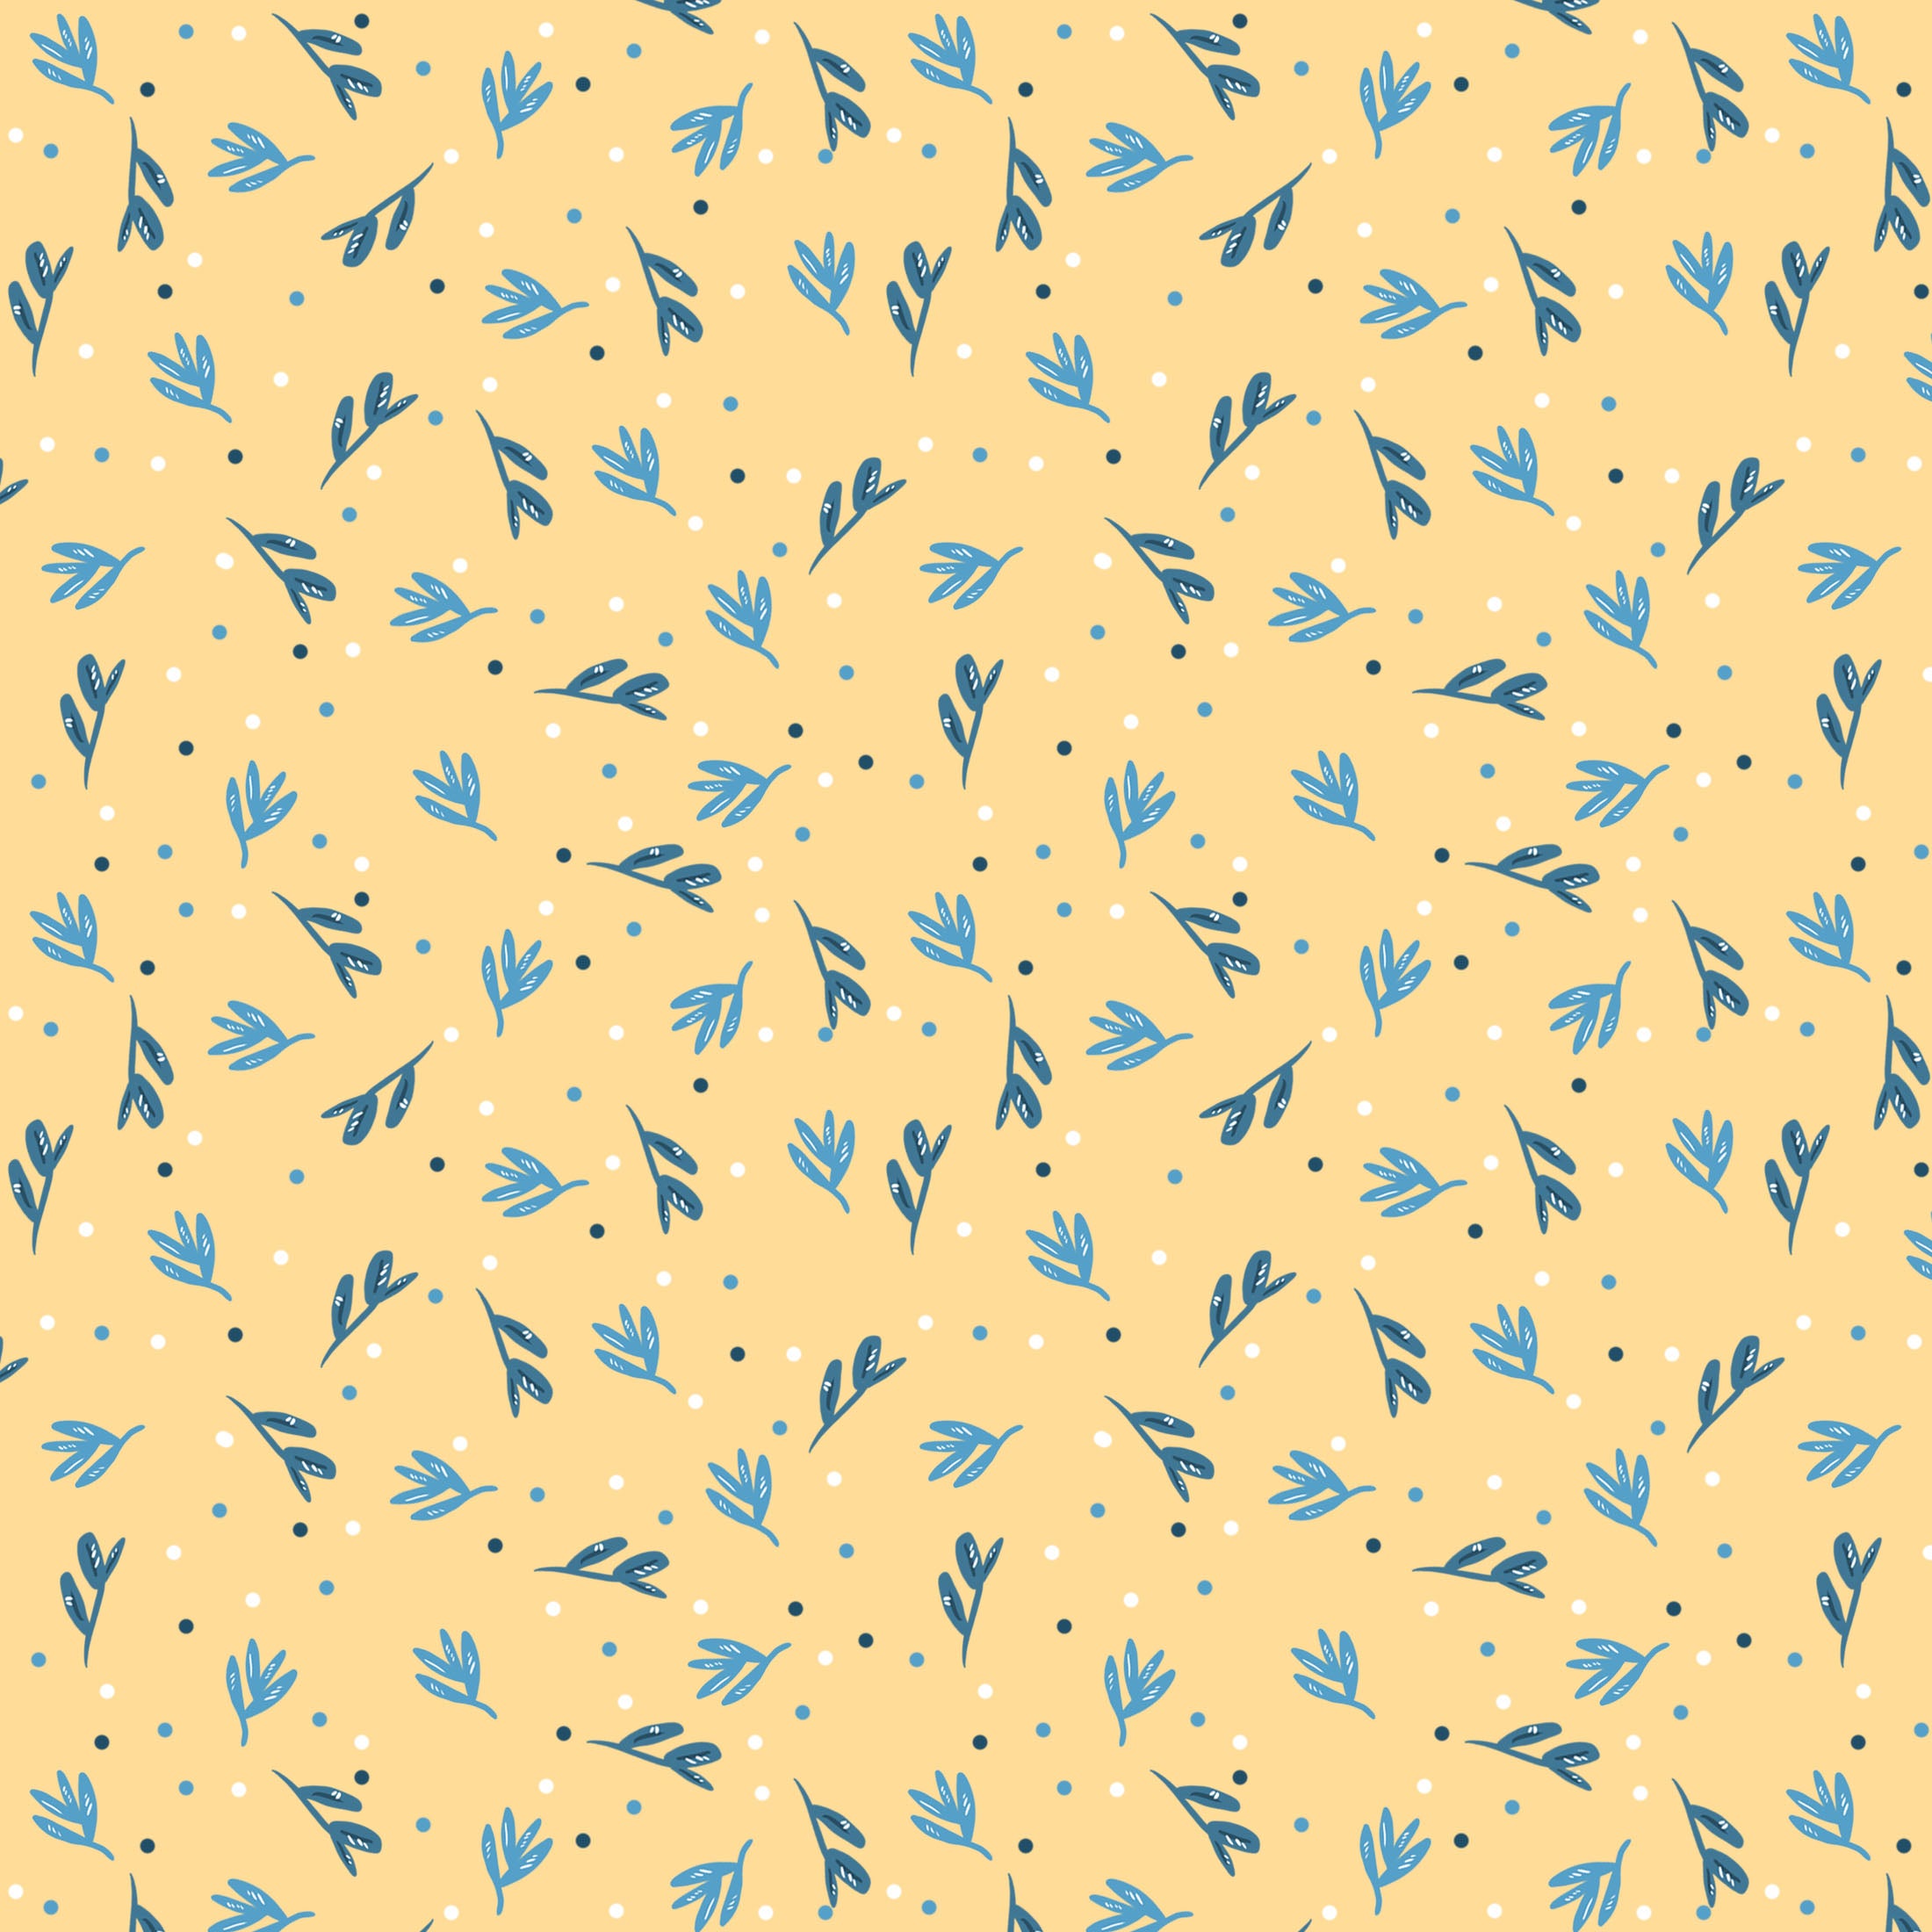 Blue tit surface pattern design seamless repeat